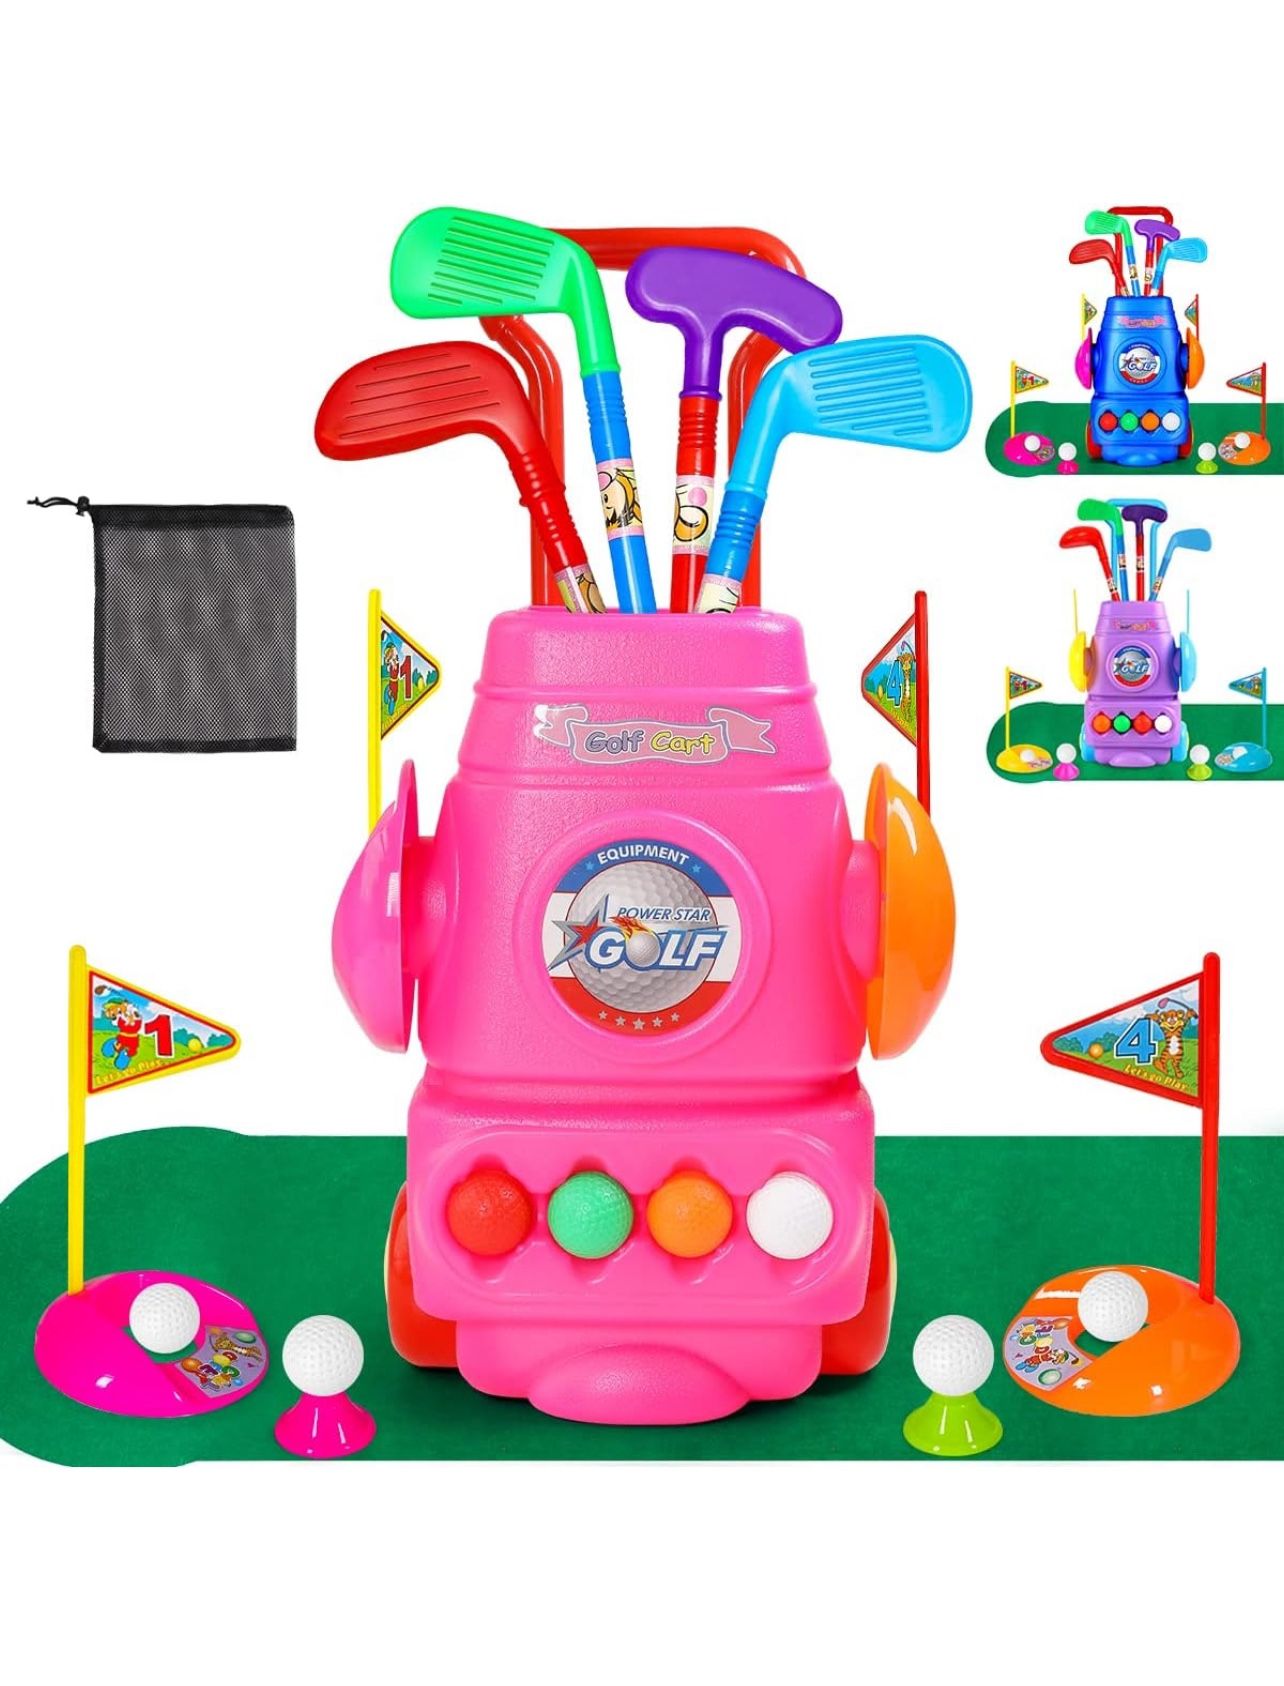 Brandnew  Kids Golf Club Set - Toddler Golf Ball Game Play Set Sports Toys Gift for Boys Girls 3 4 5 6 Year Old (Pink)